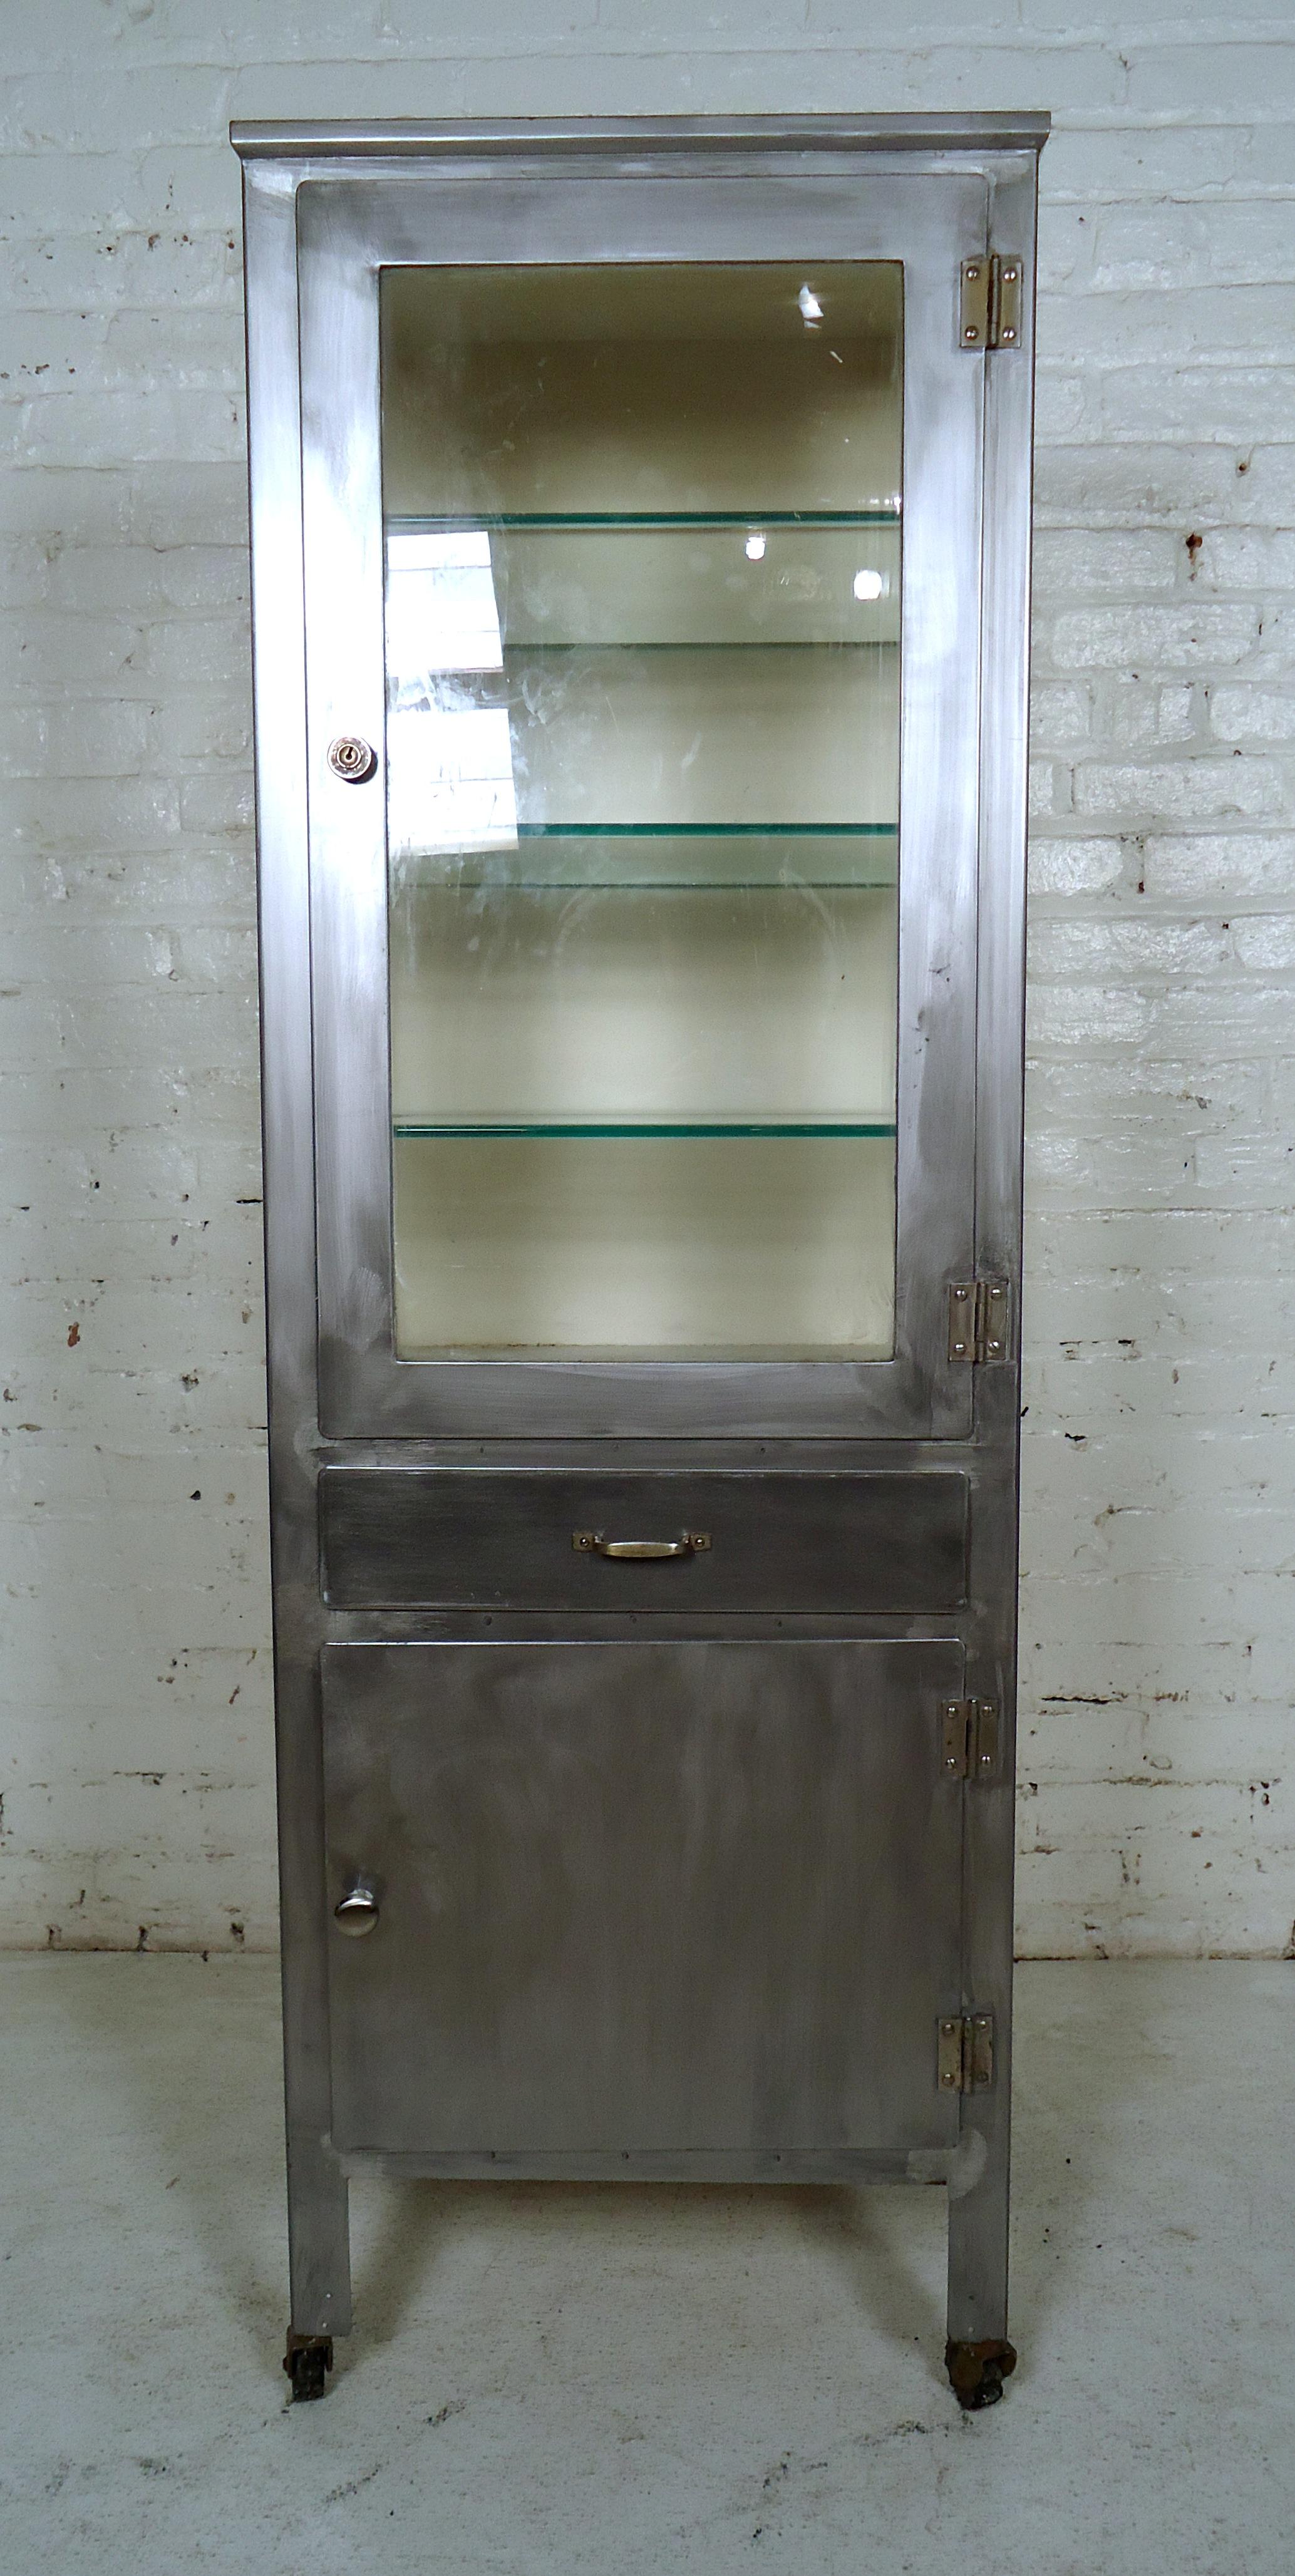 Vintage medical cabinet stripped to bare metal and lacquered for a handsome industrial look. Two lower drawers, top cabinet featuring many glass shelves on wheels.

Please confirm item location - NY or NJ - with dealer).

